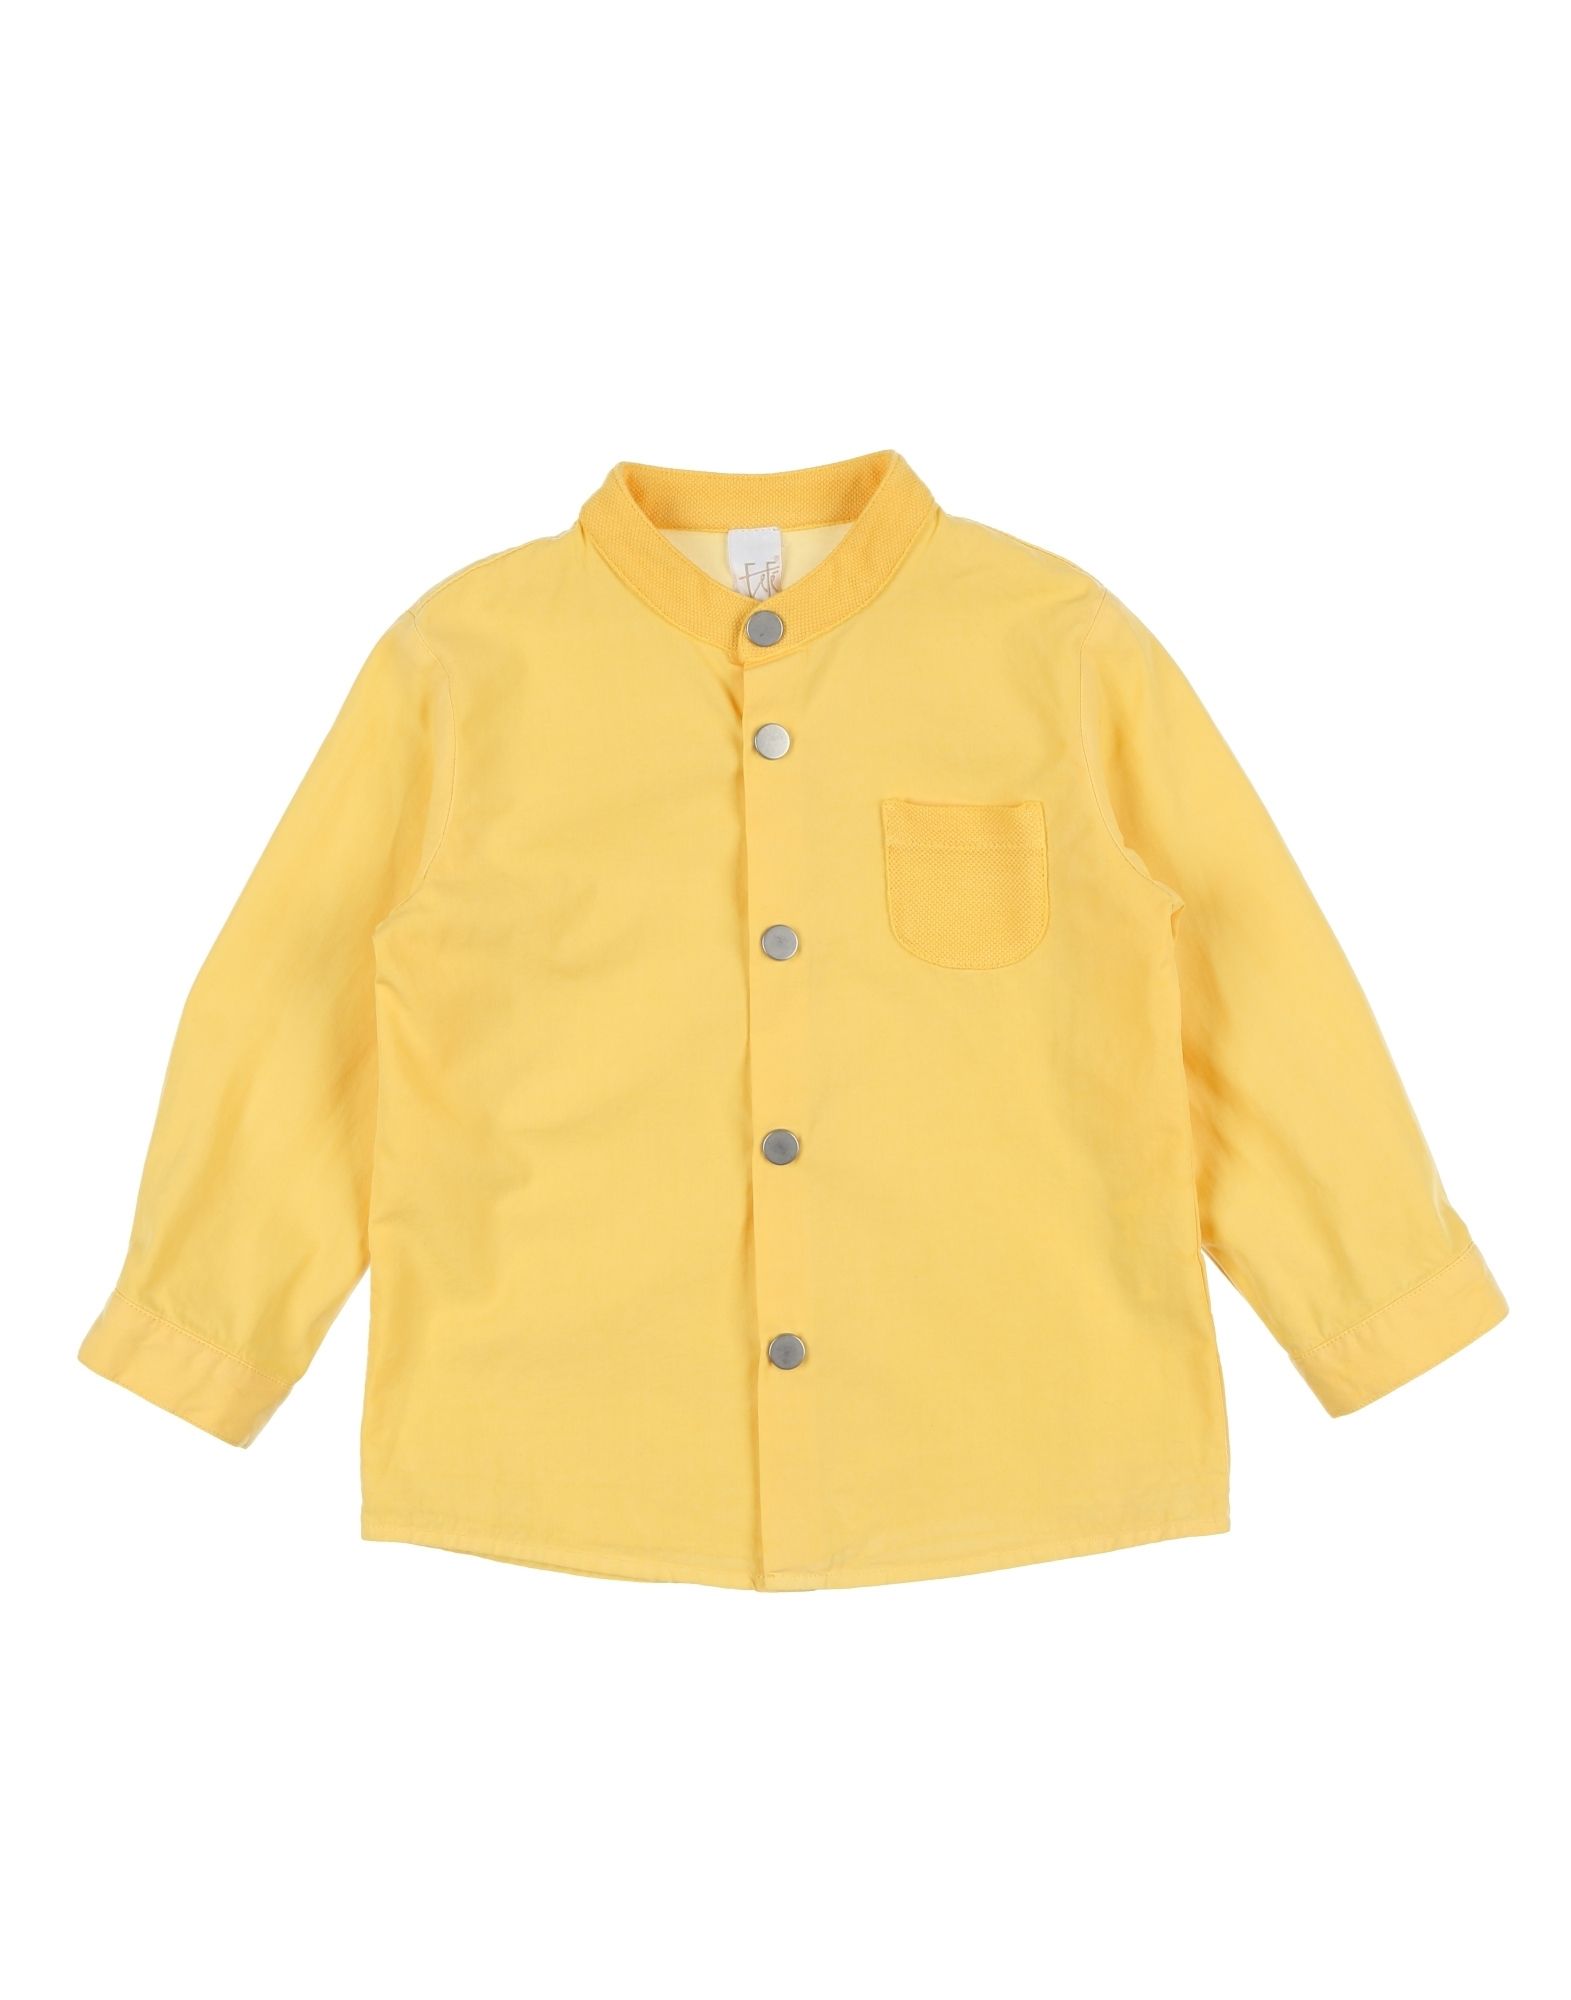 FEFEE Solid color shirt